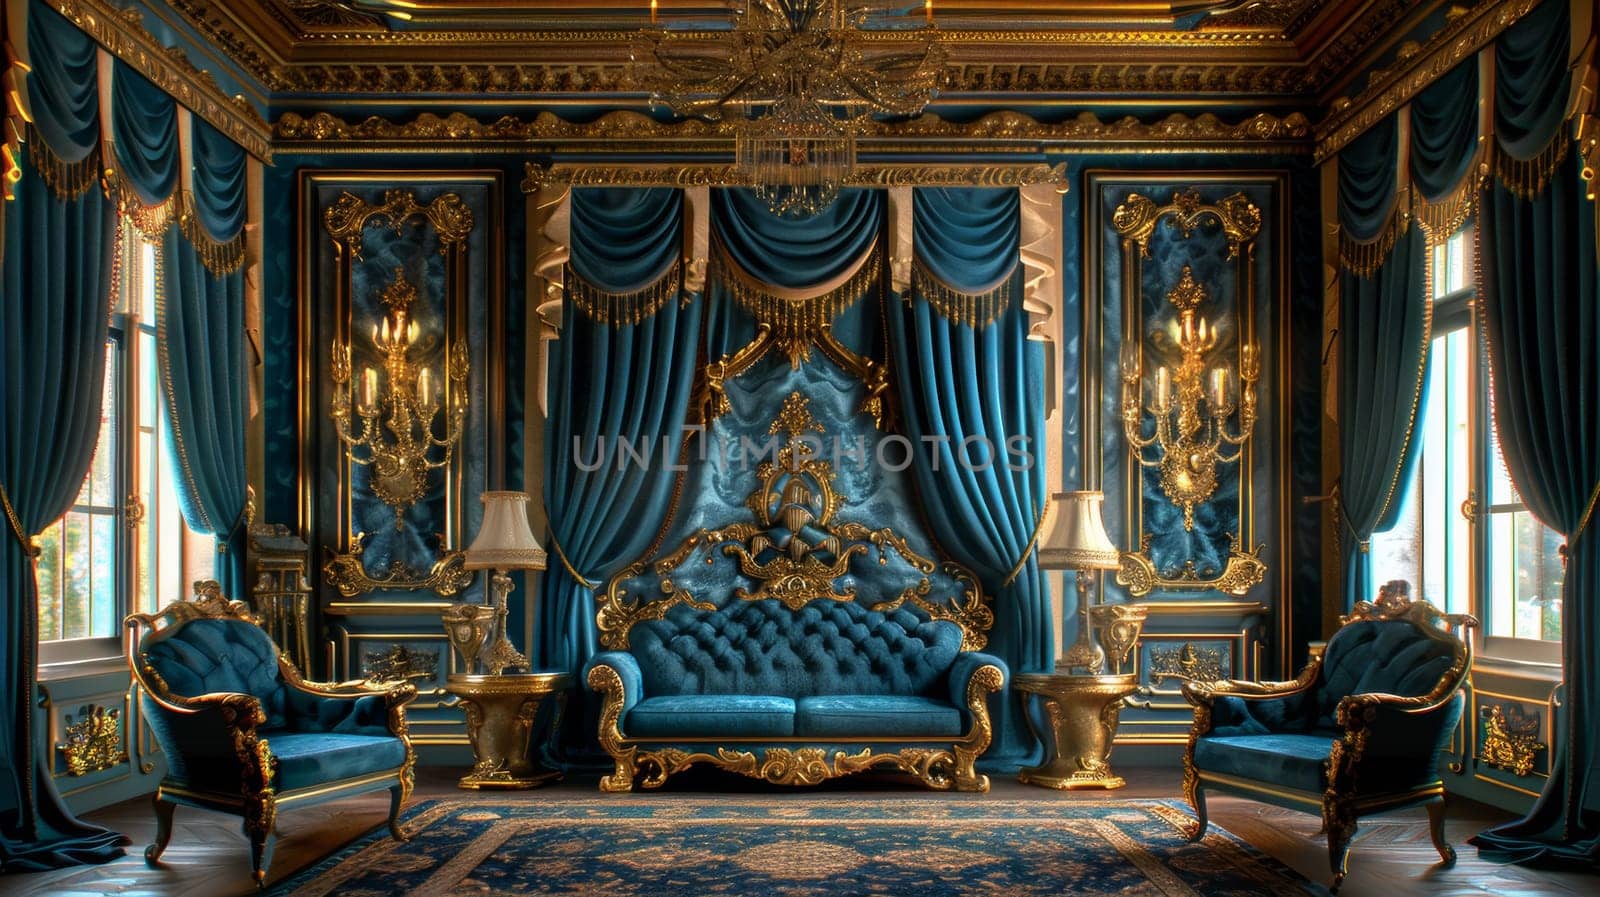 A fancy room with blue walls and gold curtains